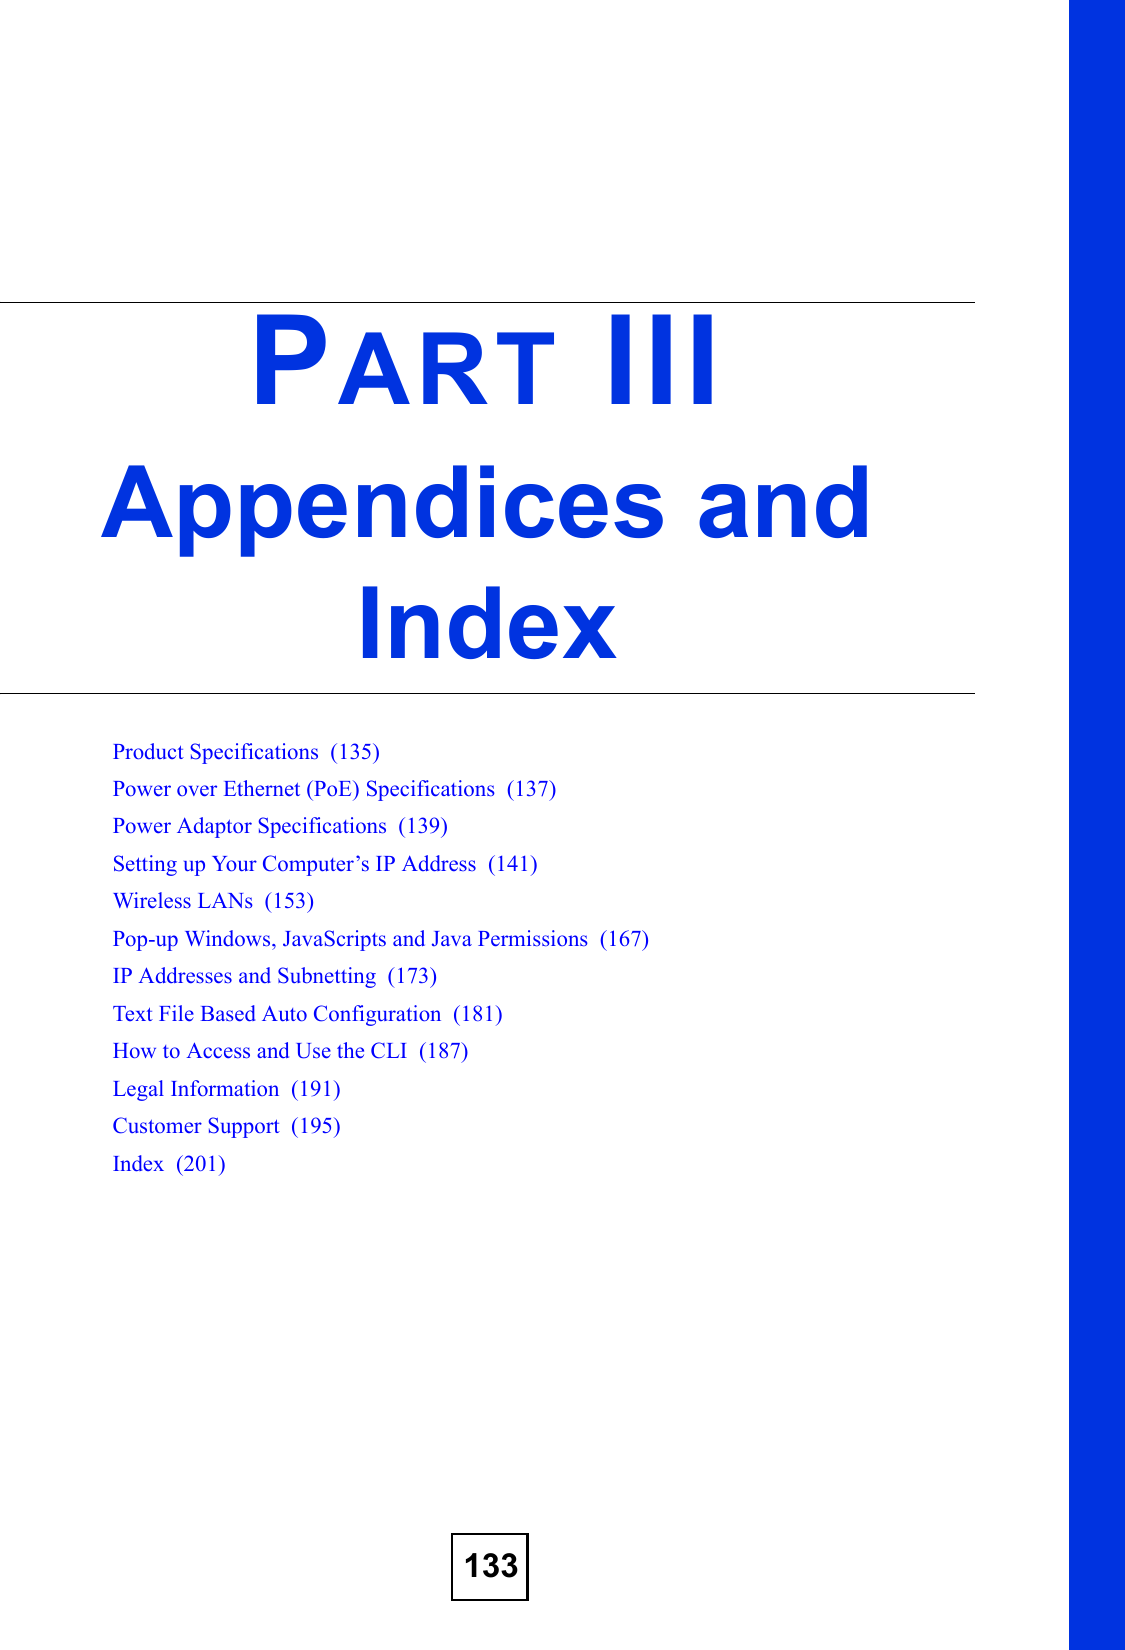 133PART IIIAppendices and IndexProduct Specifications  (135)Power over Ethernet (PoE) Specifications  (137)Power Adaptor Specifications  (139)Setting up Your Computer’s IP Address  (141)Wireless LANs  (153)Pop-up Windows, JavaScripts and Java Permissions  (167)IP Addresses and Subnetting  (173)Text File Based Auto Configuration  (181)How to Access and Use the CLI  (187)Legal Information  (191)Customer Support  (195)Index  (201)